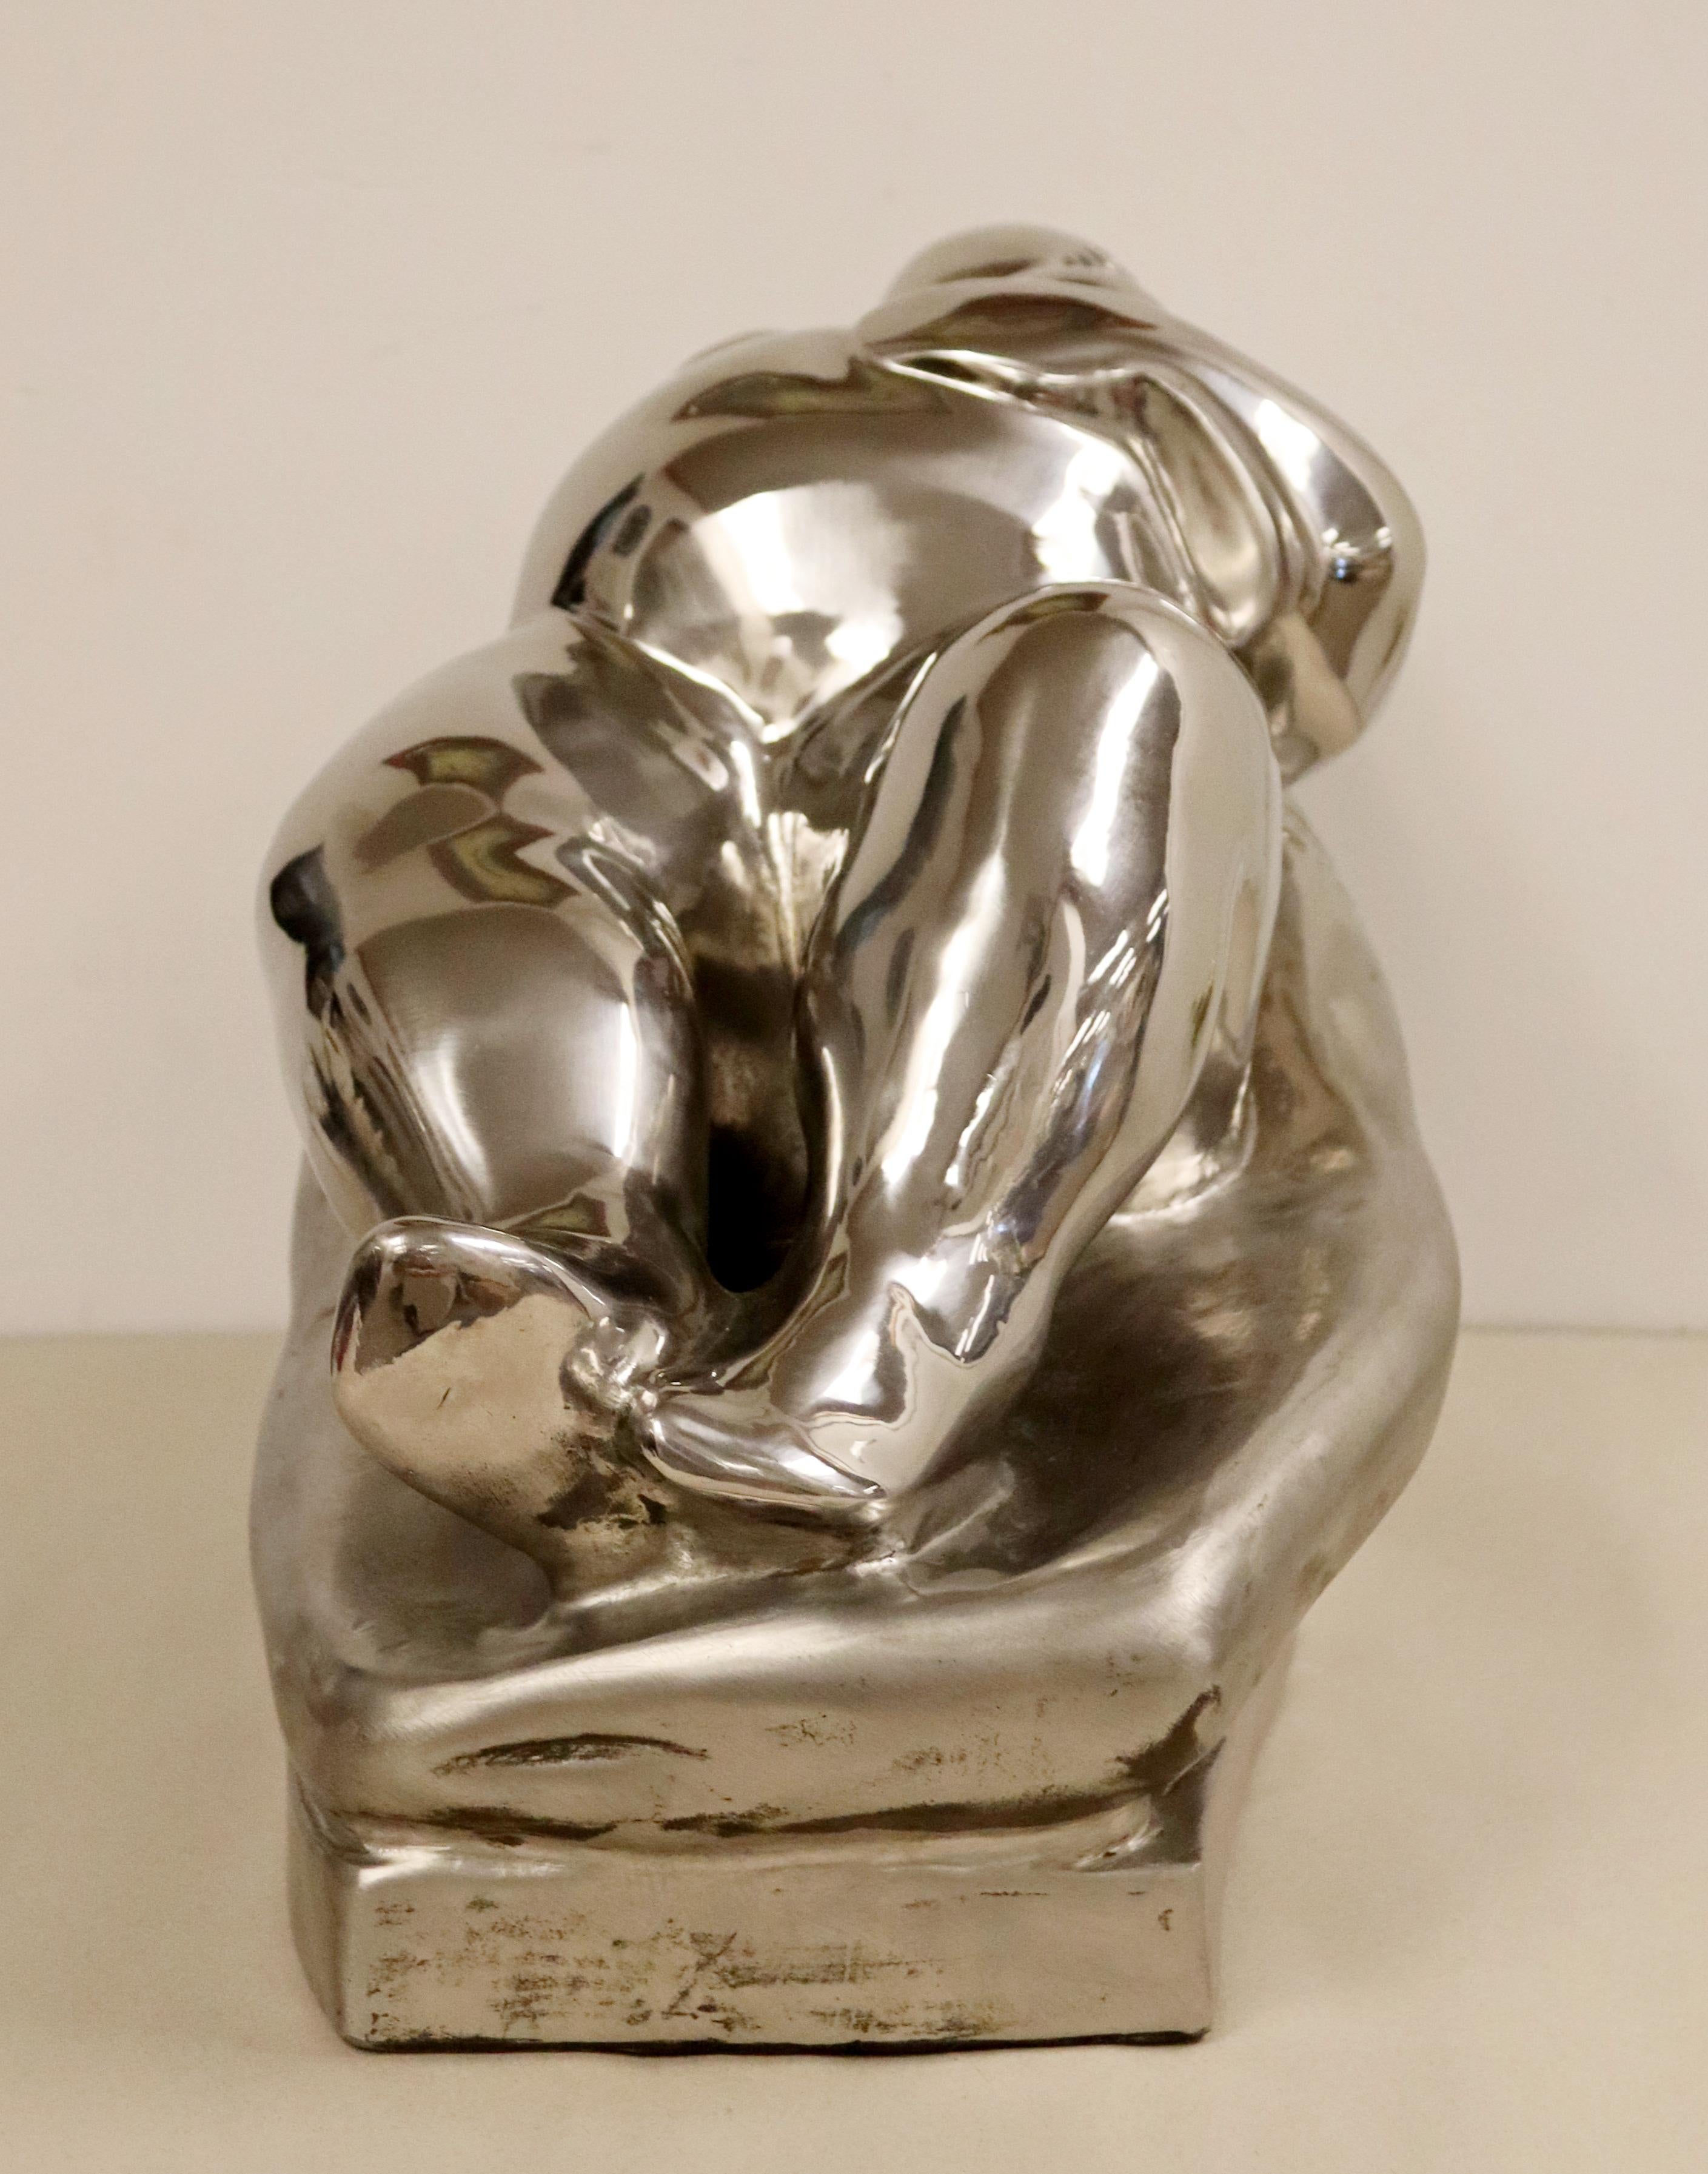 Contemporary Stainless Steel Little Goddess Table Sculpture by Jerry Soble 1990s For Sale 1